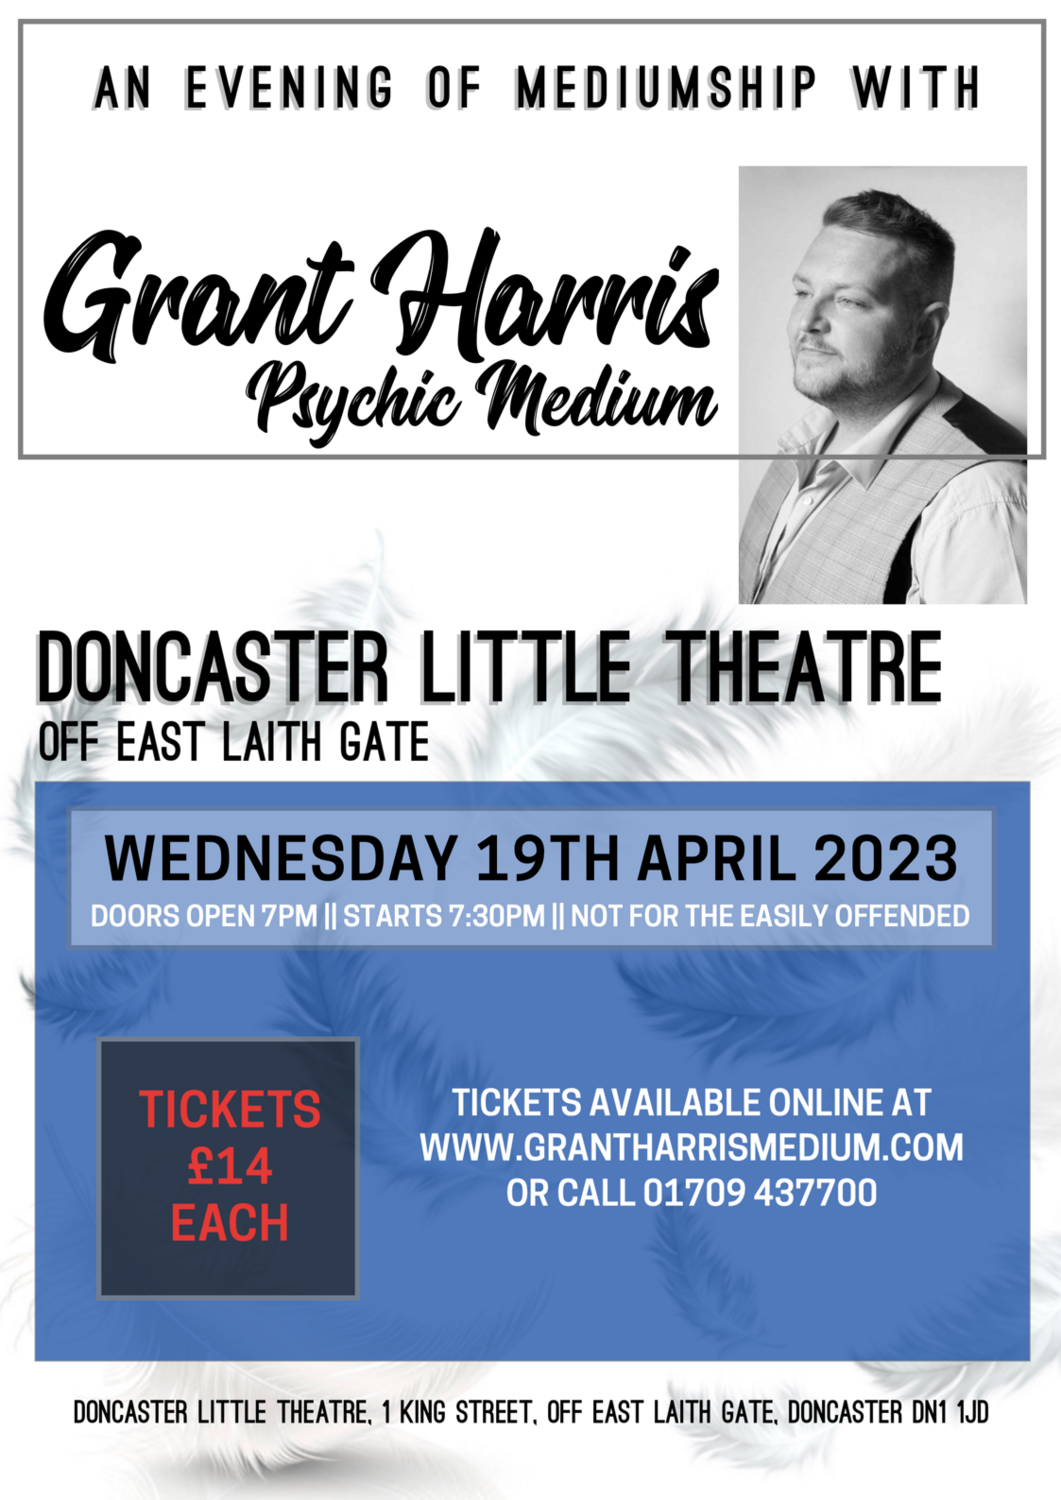 Doncaster Little Theatre, Wednesday 19th April 2023